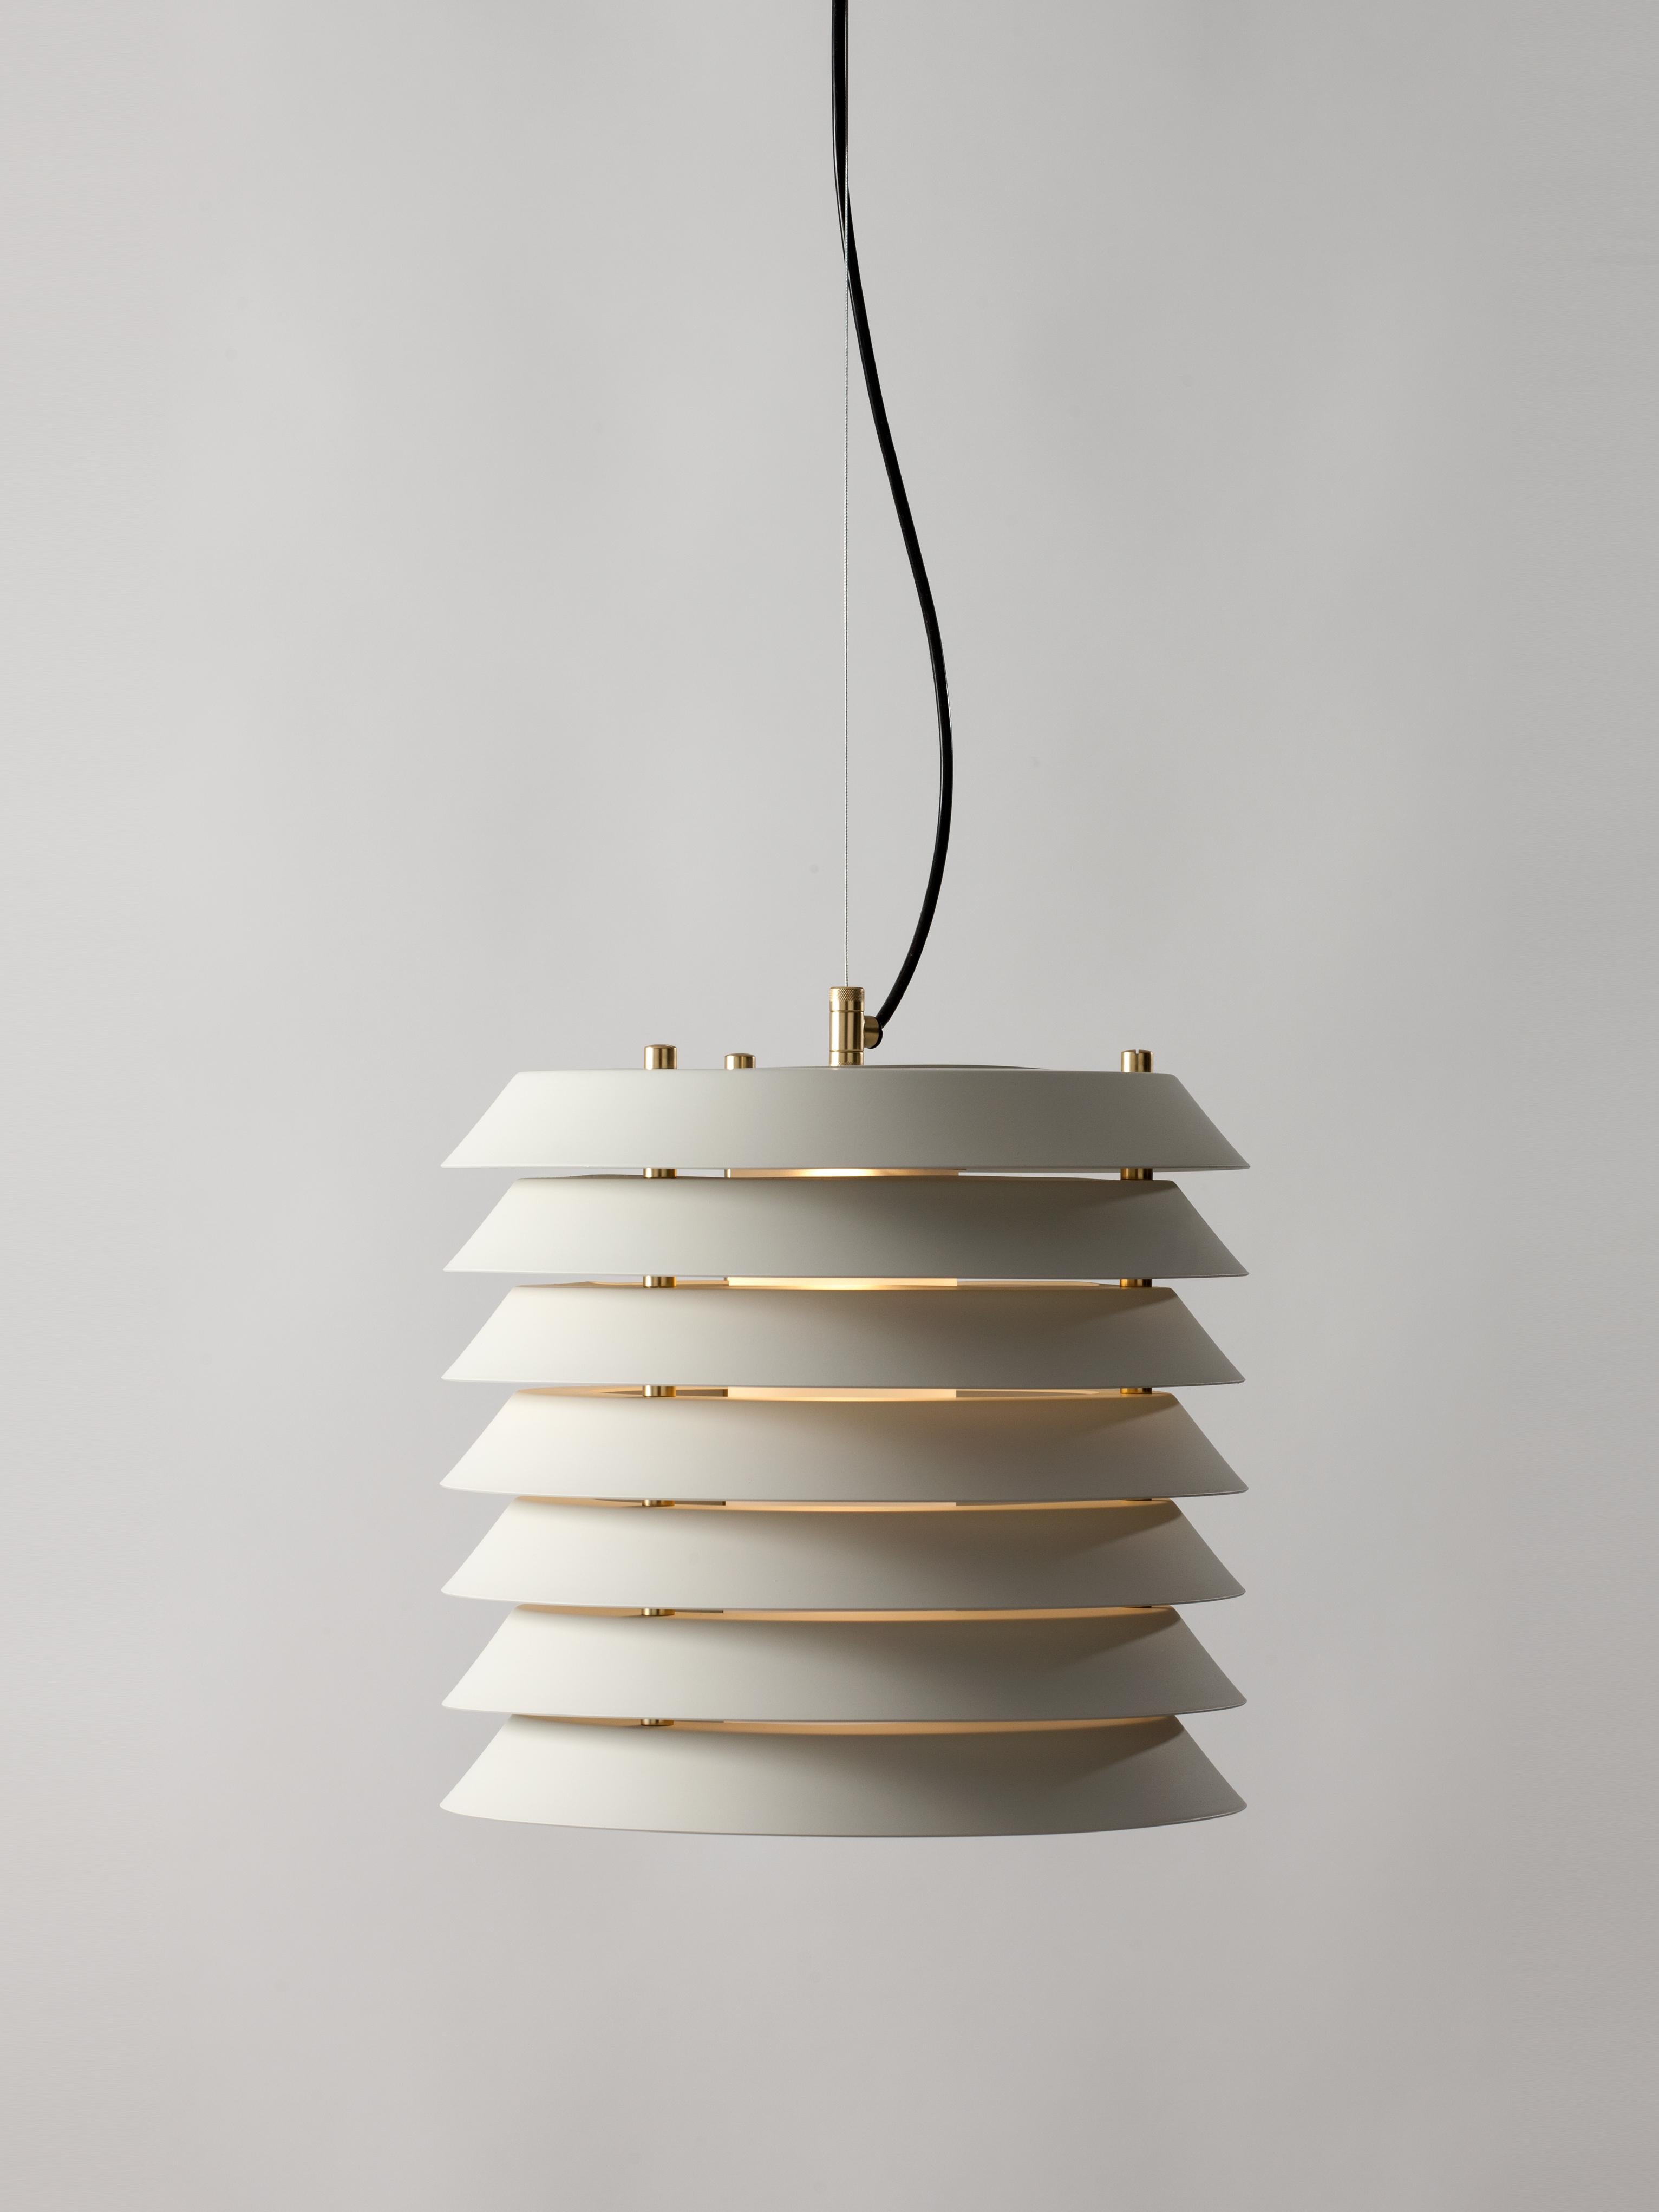 Maija 30 pendant lamp by Ilmari Tapiovaara.
Dimensions: D 30 x H 28 cm.
Materials: metal, glass.

Maija conveys the feeling of light typical of Baltic cities, where the streets are barely illuminated, apart from the light streamed through the